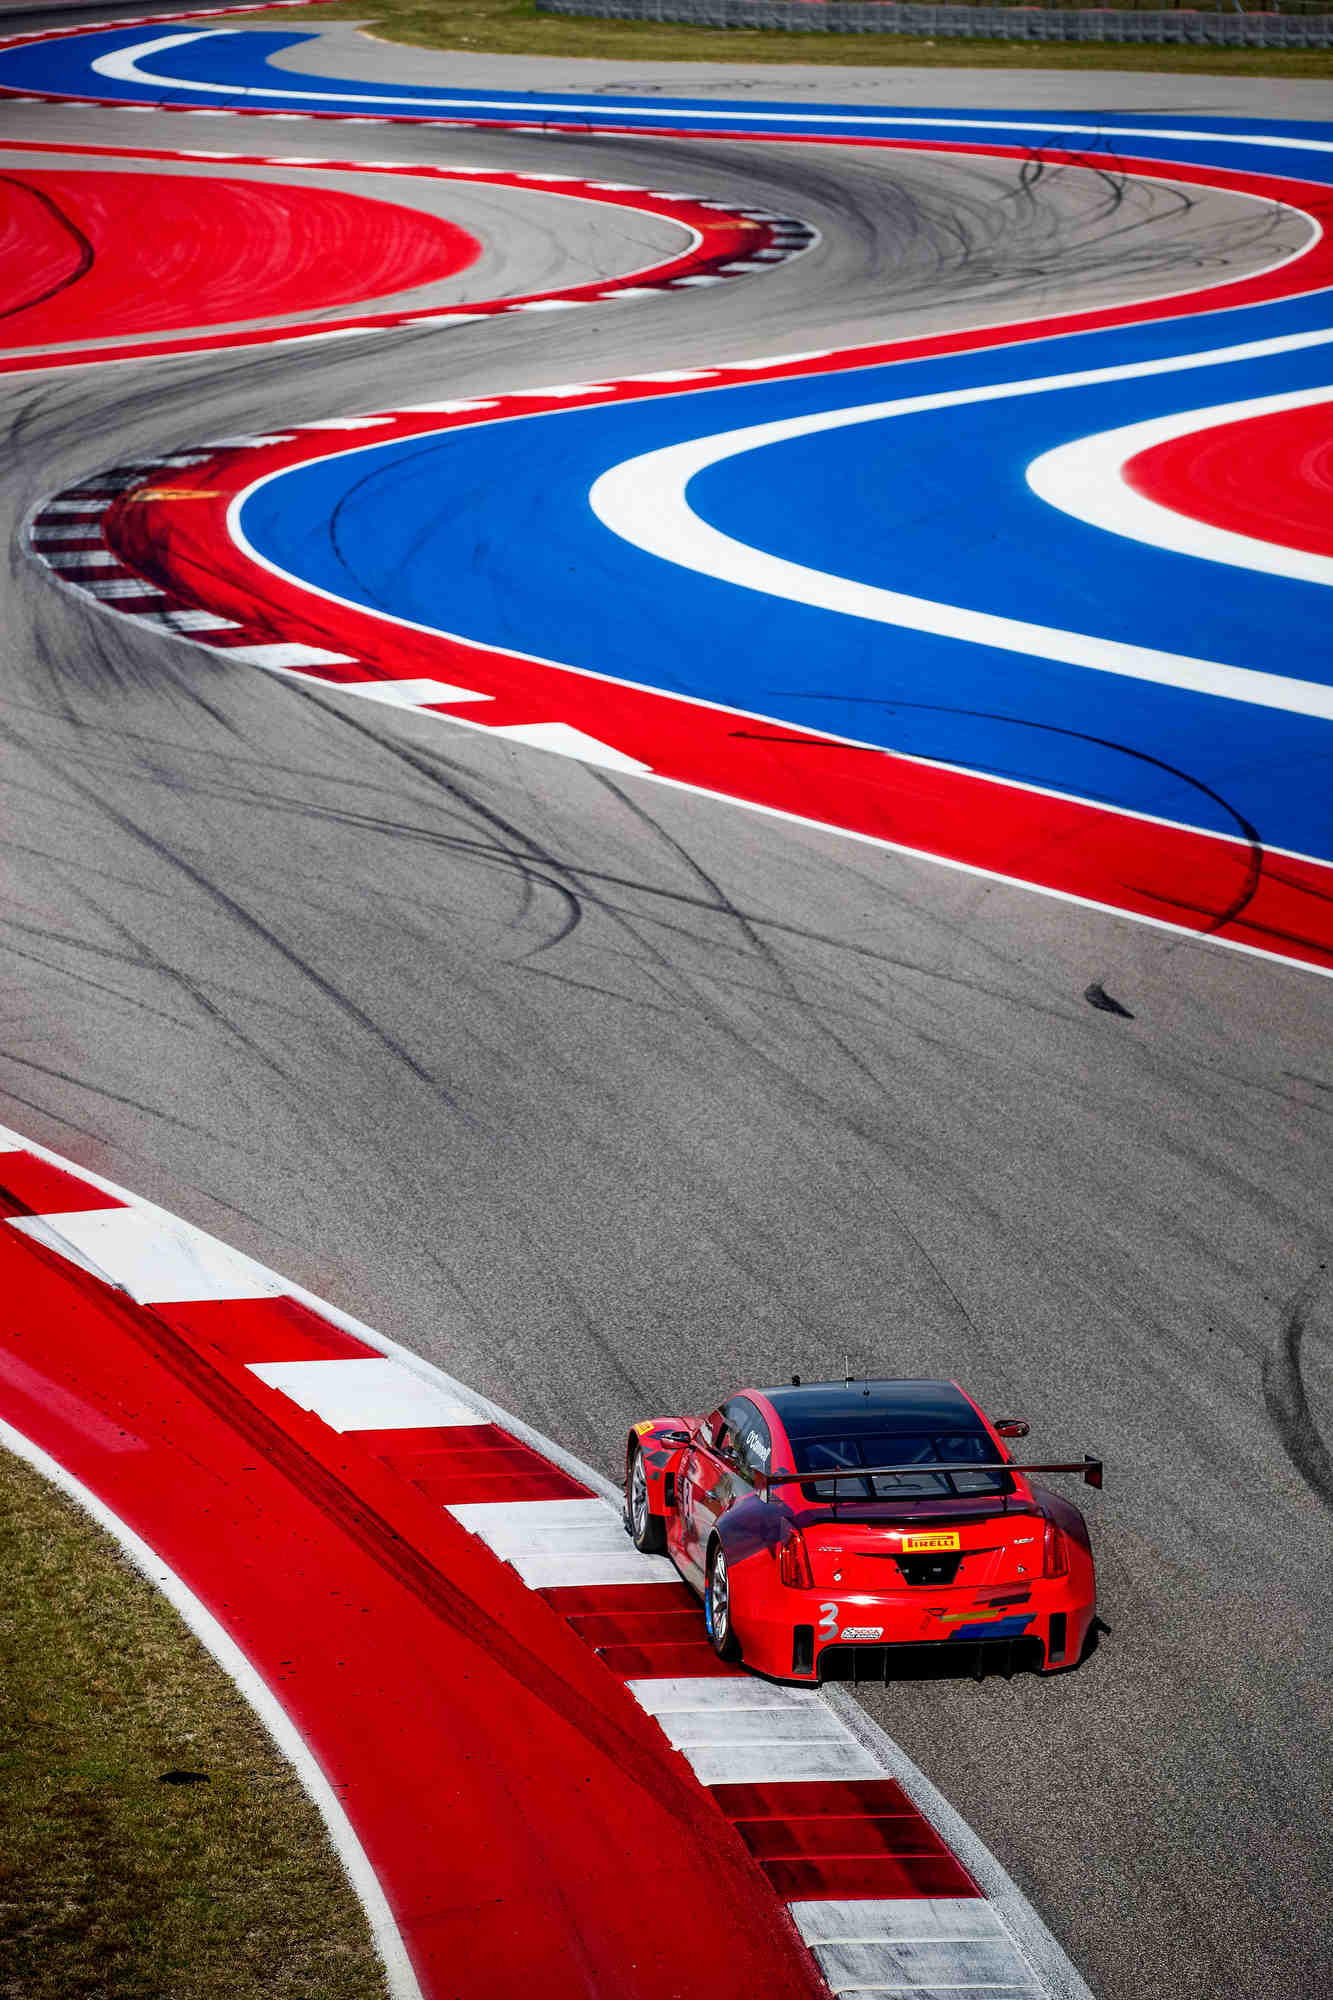 Racing goes on at COTA